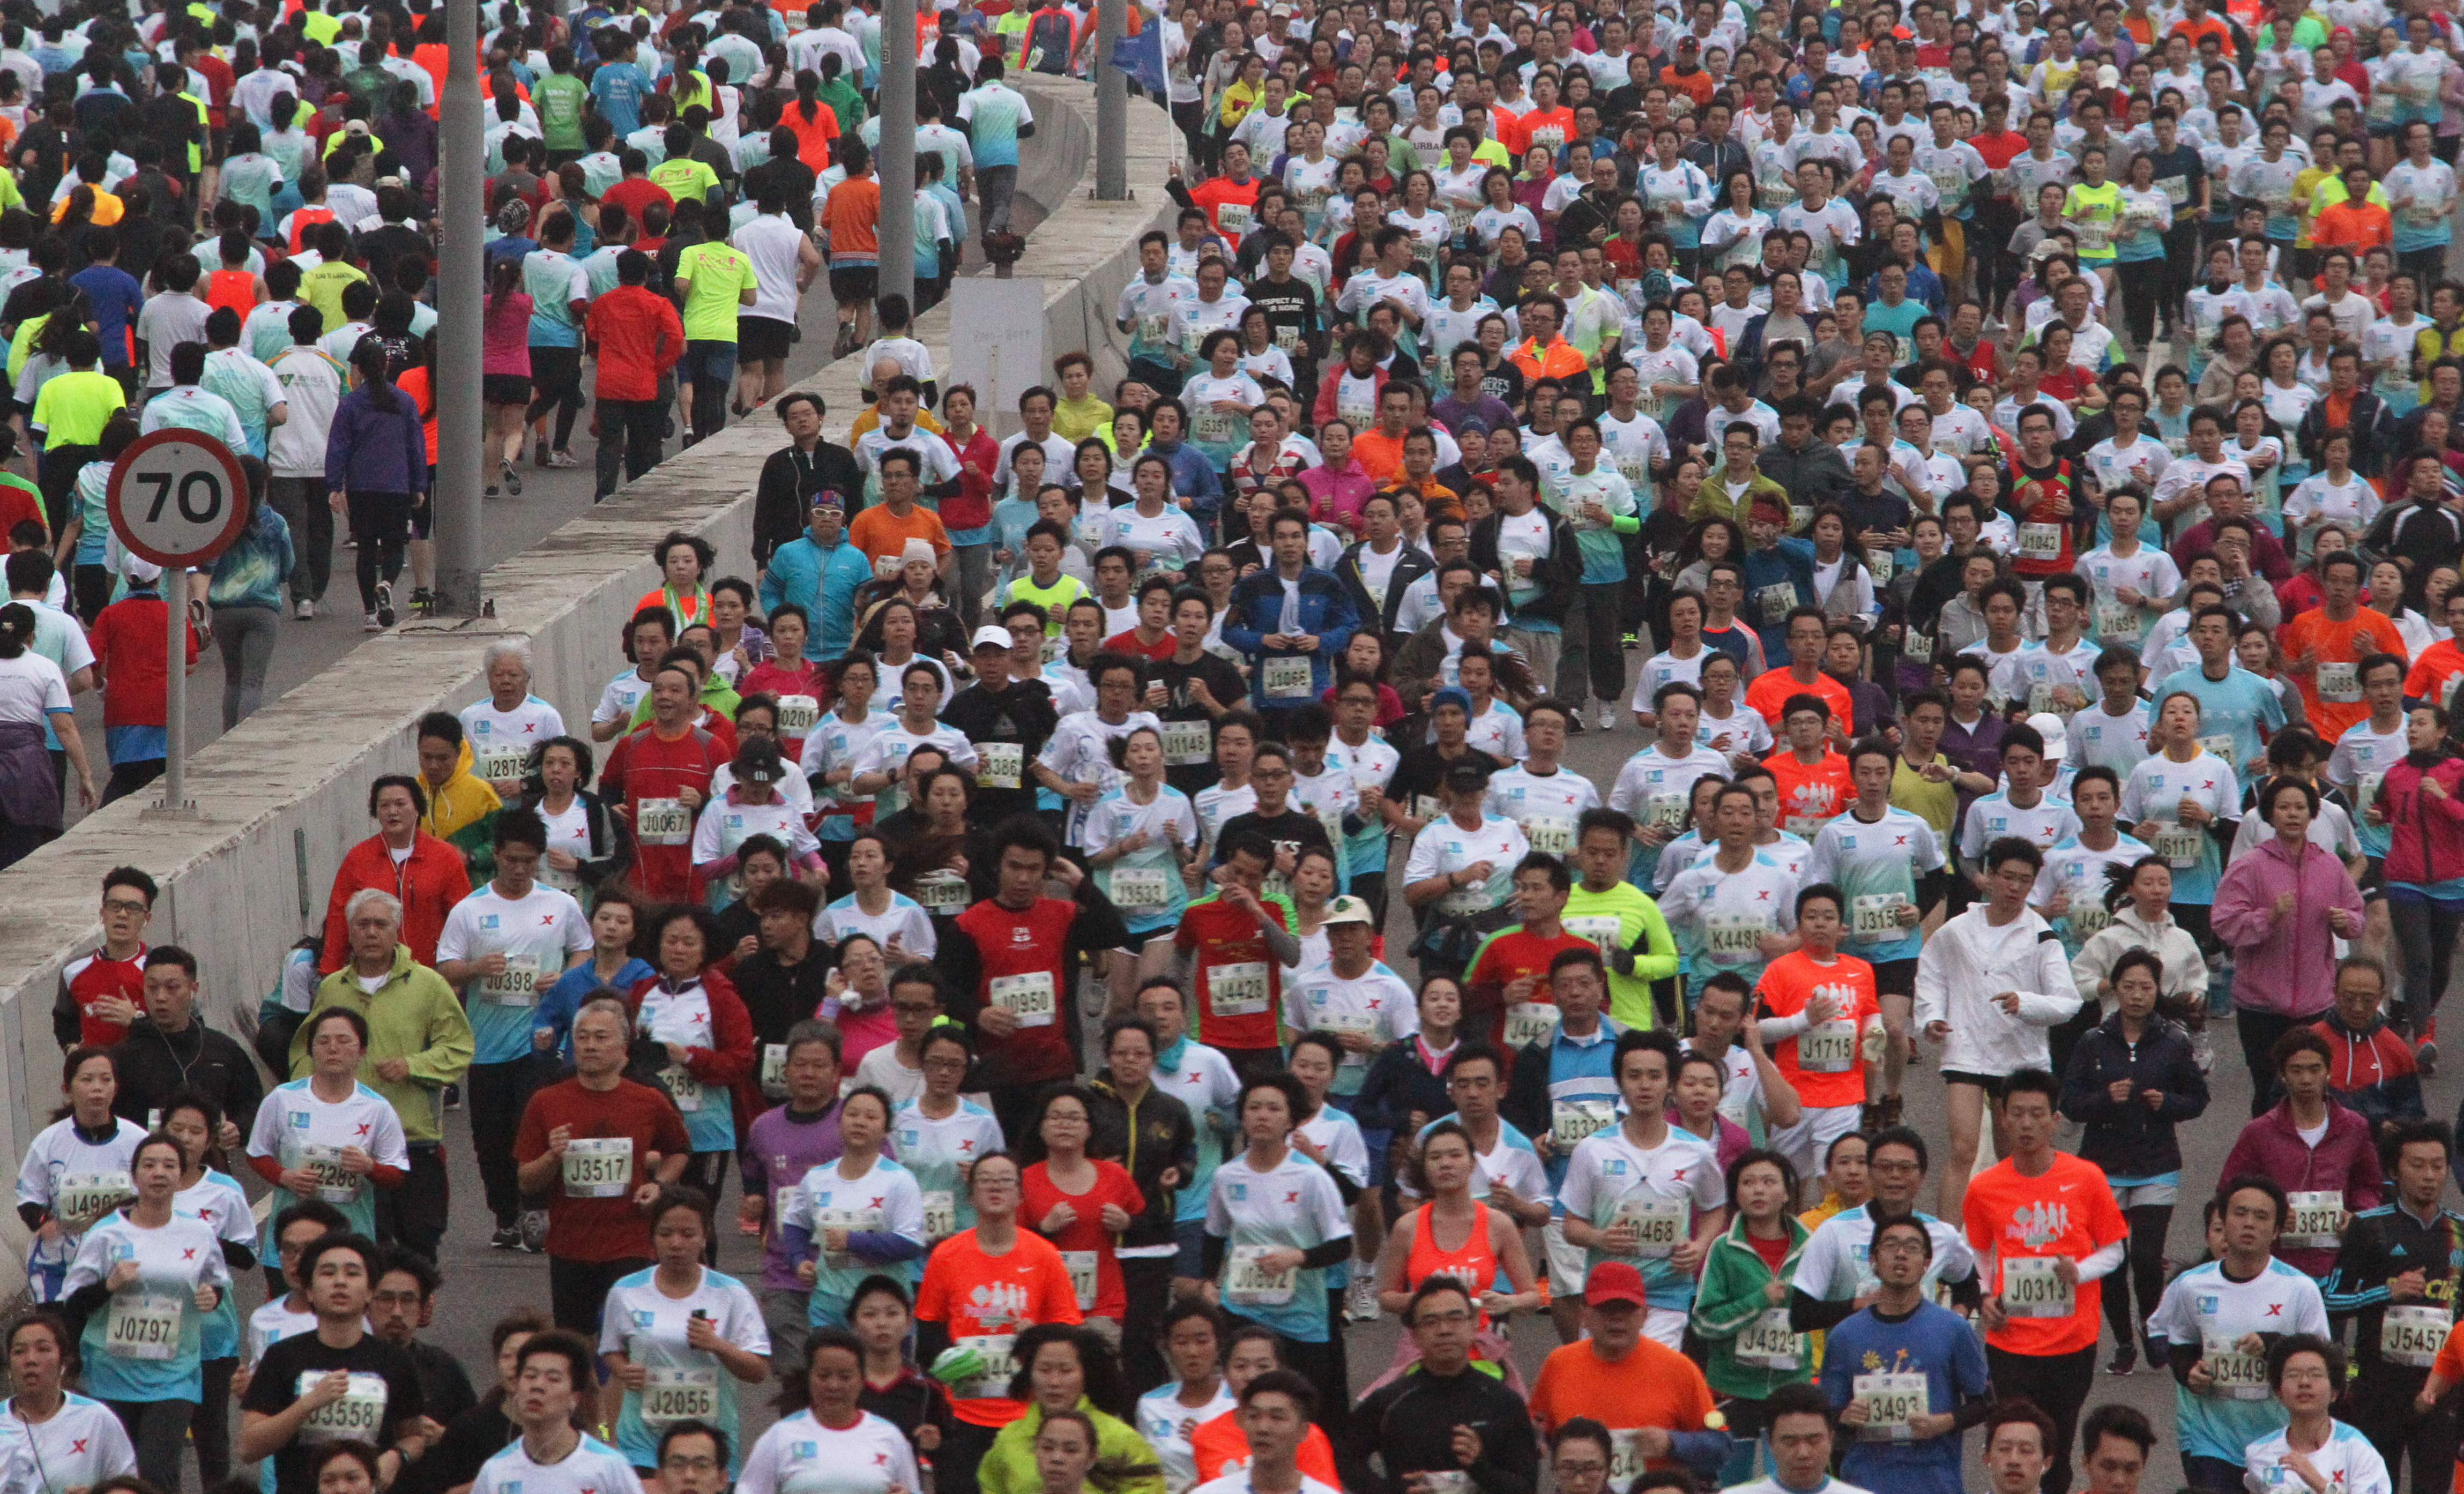 The Hong Kong Marathon has grown from strength to strength over the years. Photo: Felix Wong